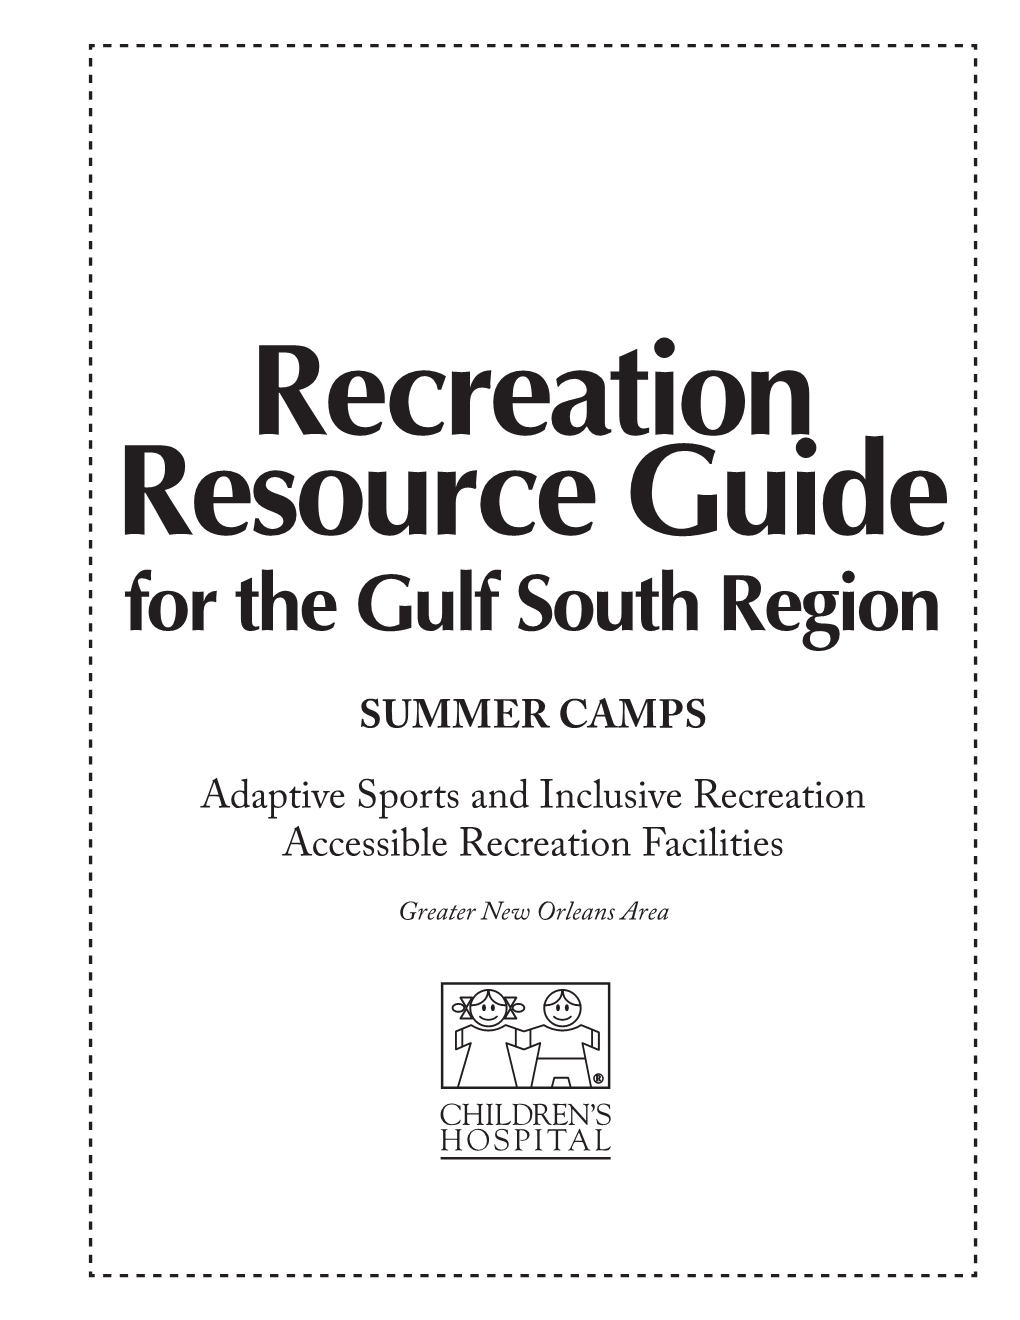 SUMMER CAMPS Adaptive Sports and Inclusive Recreation Accessible Recreation Facilities